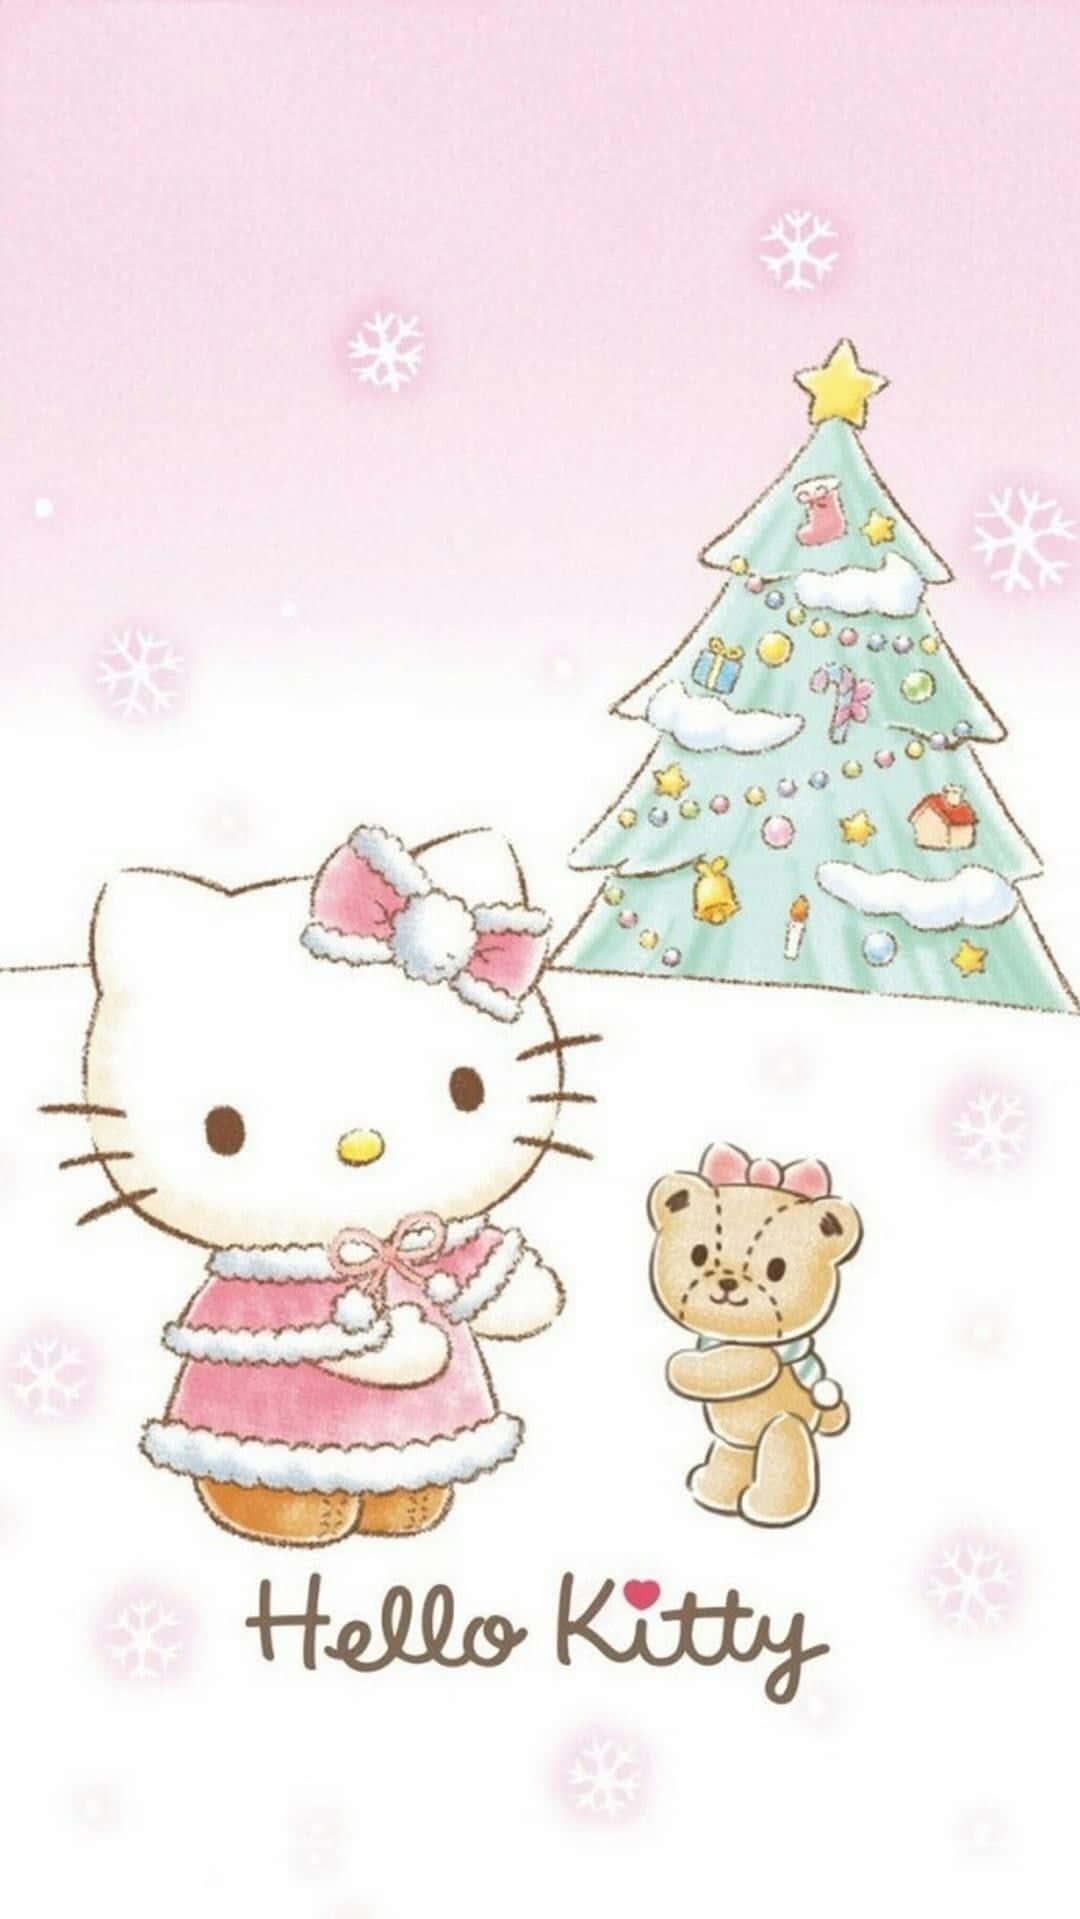 Download A Festive Hello Kitty In A Santa Hat For The Holidays